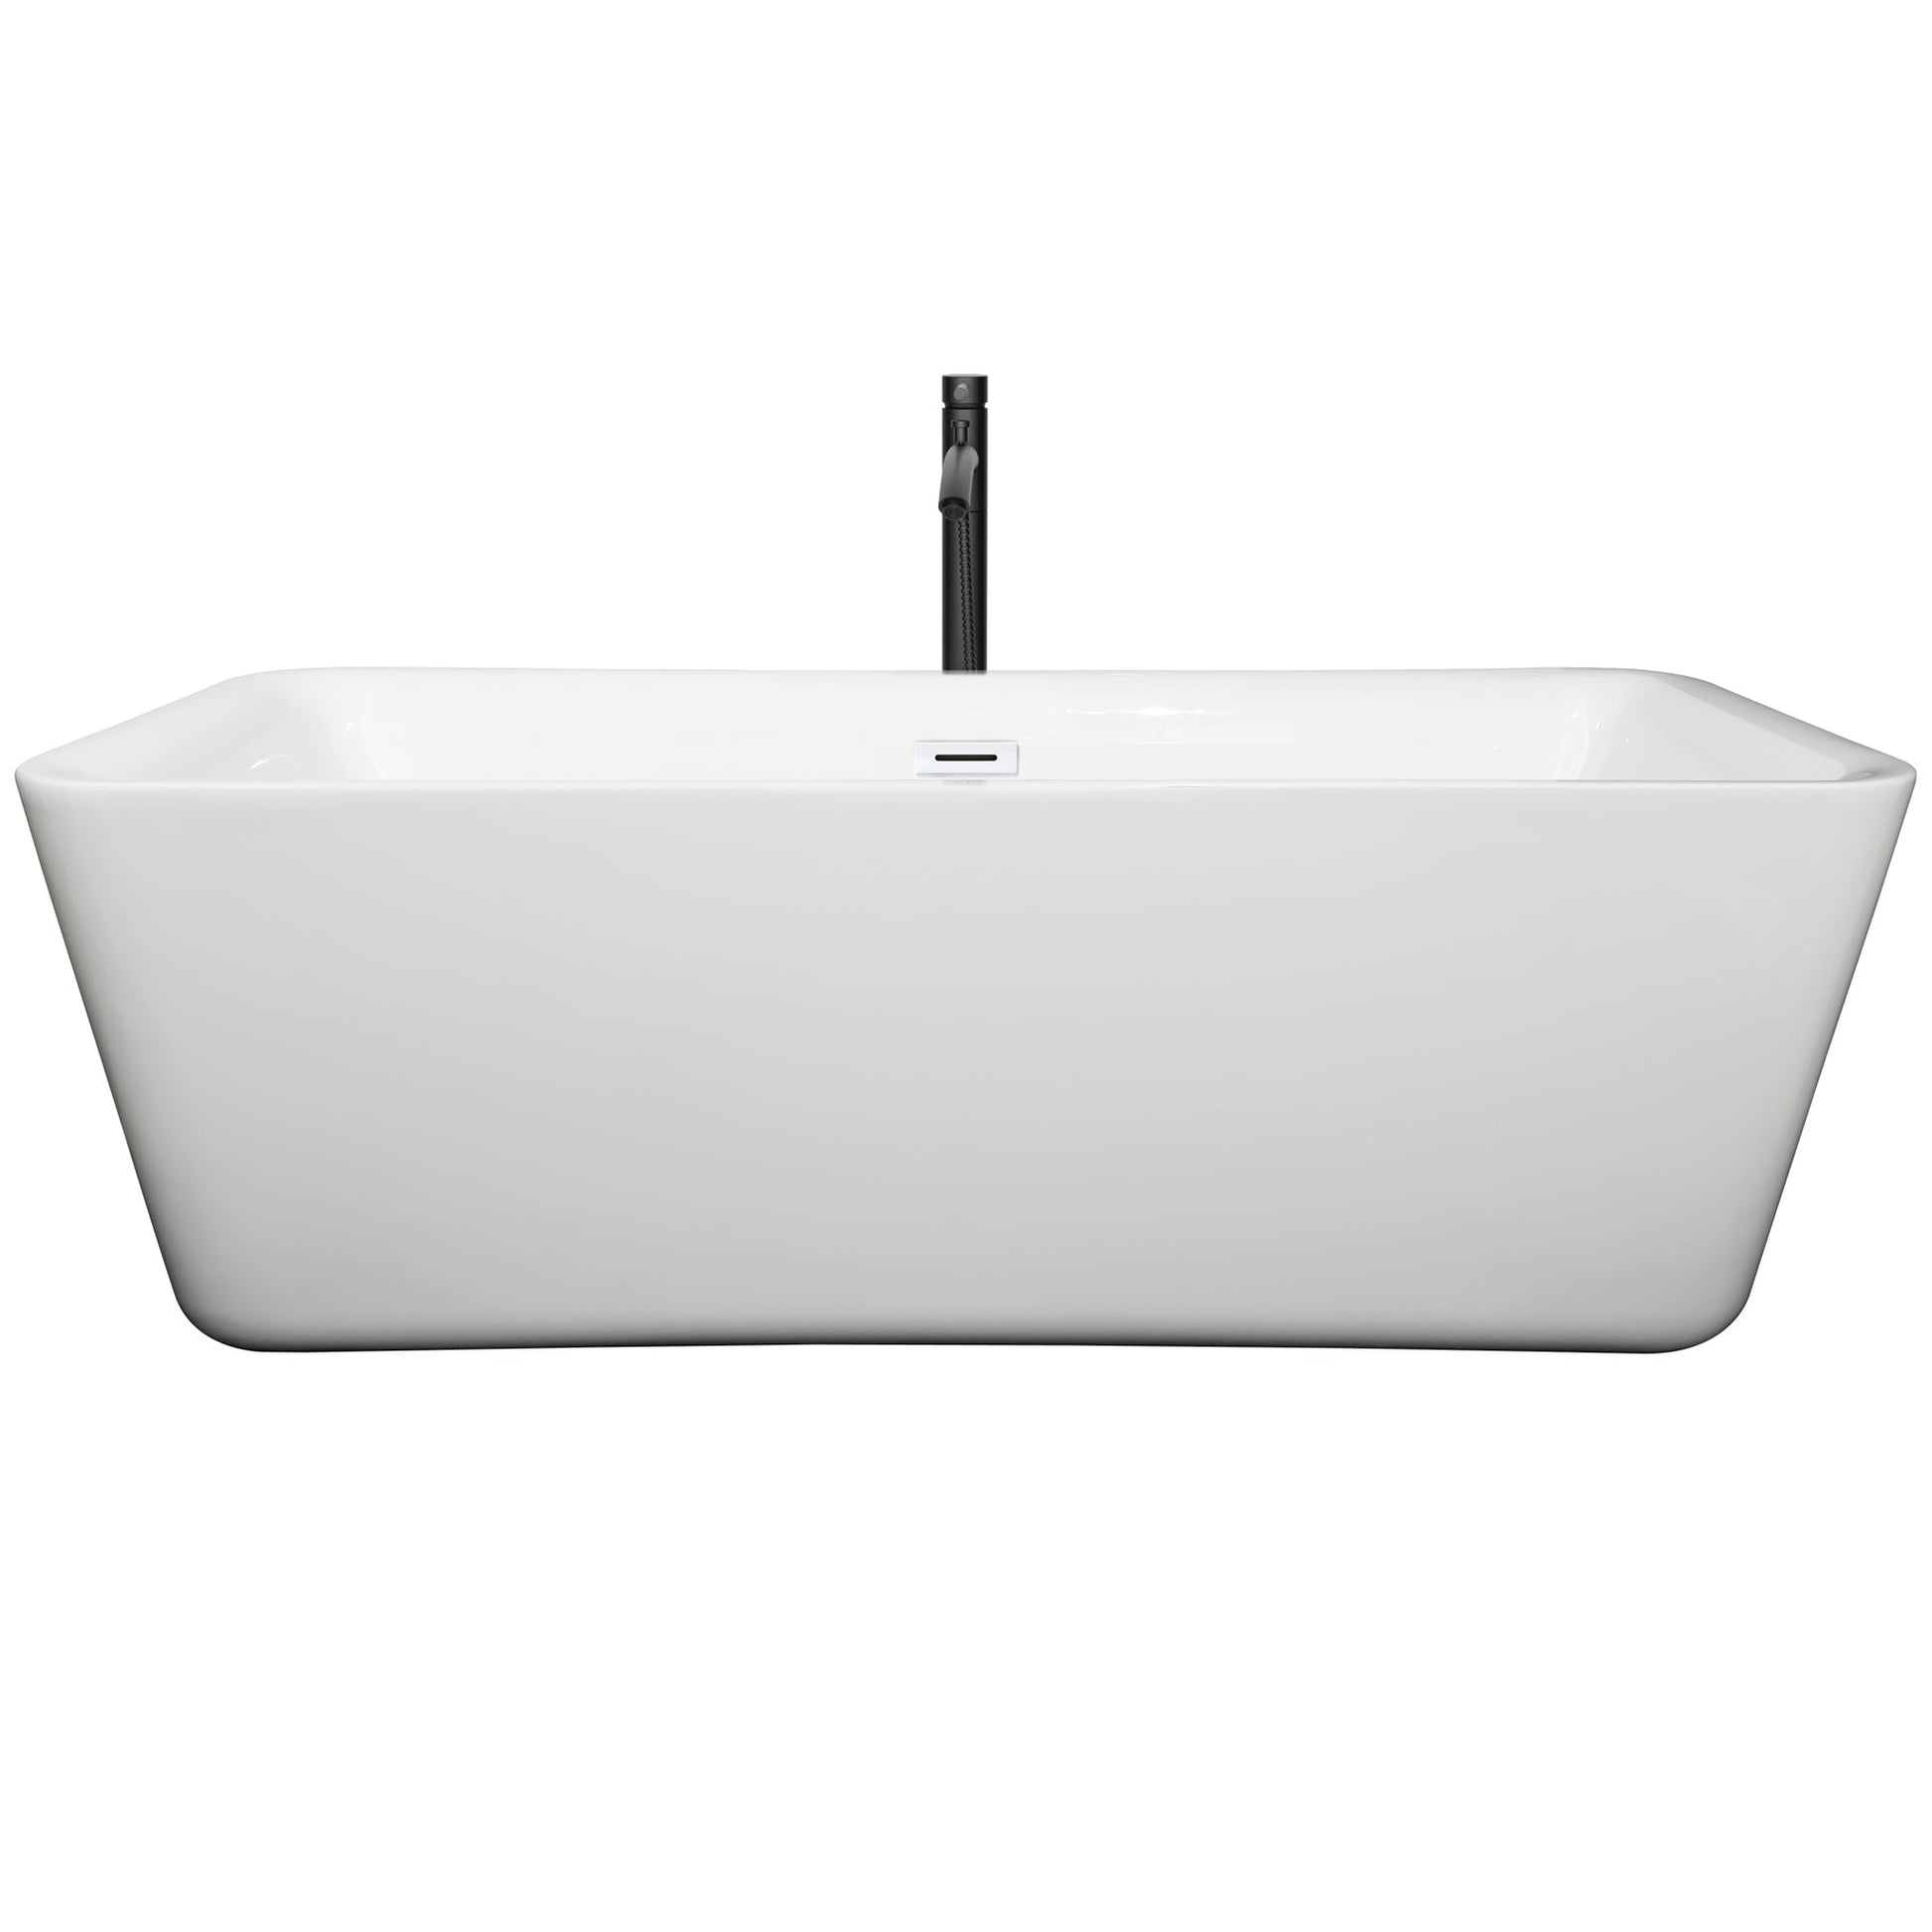 Wyndham Collection Emily 69" Freestanding Bathtub in White With Shiny White Trim and Floor Mounted Faucet in Matte Black